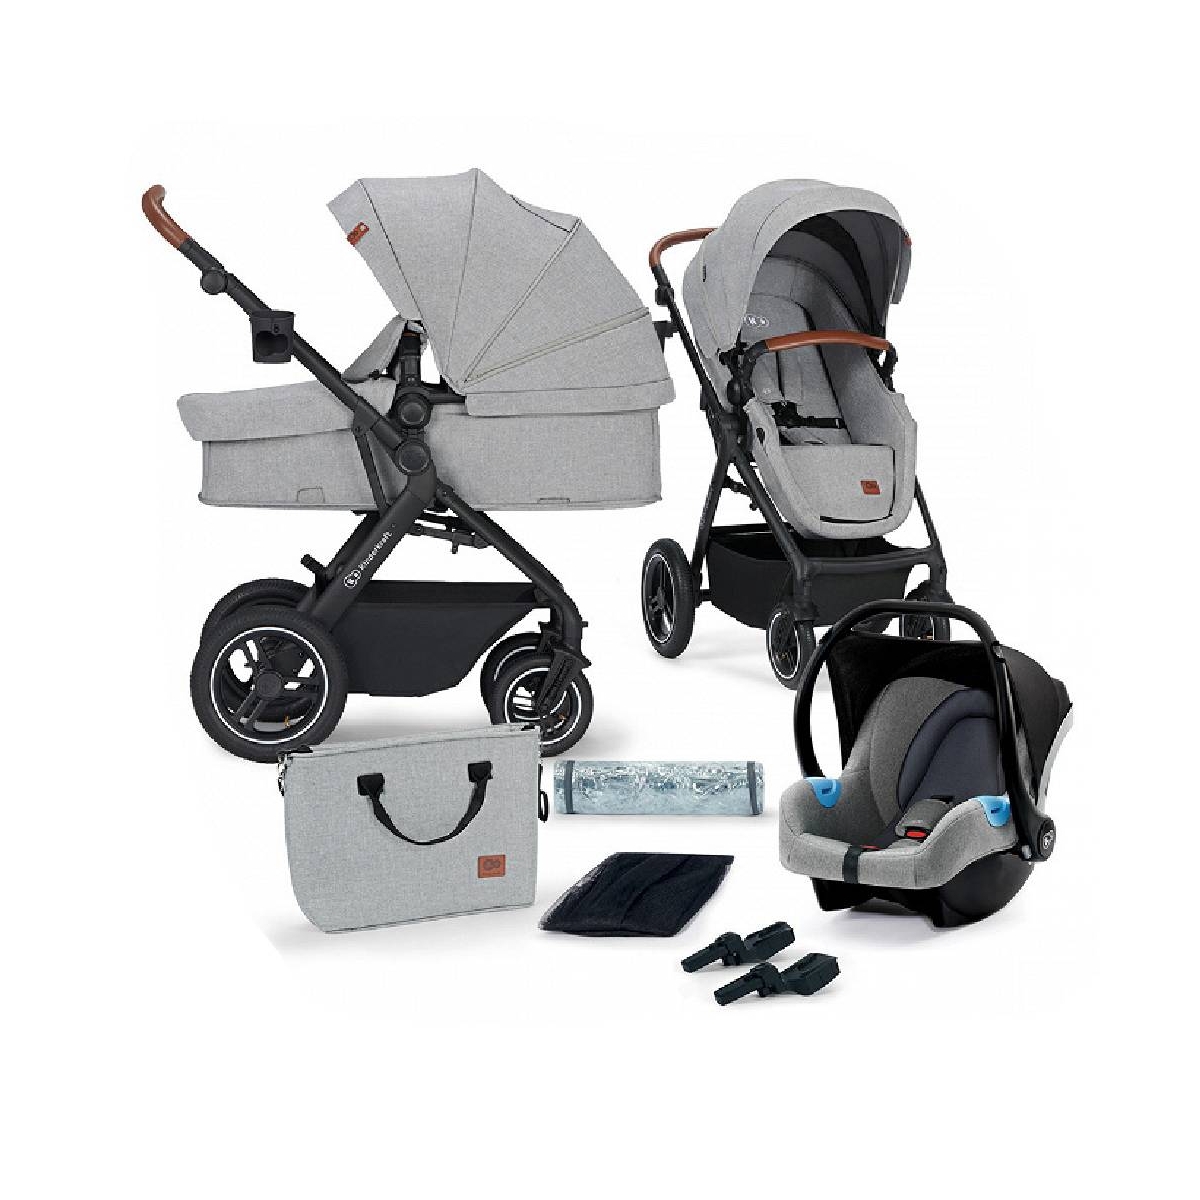 Kinderkraft B-Tour 3in1 with Mink Car Seat Travel System